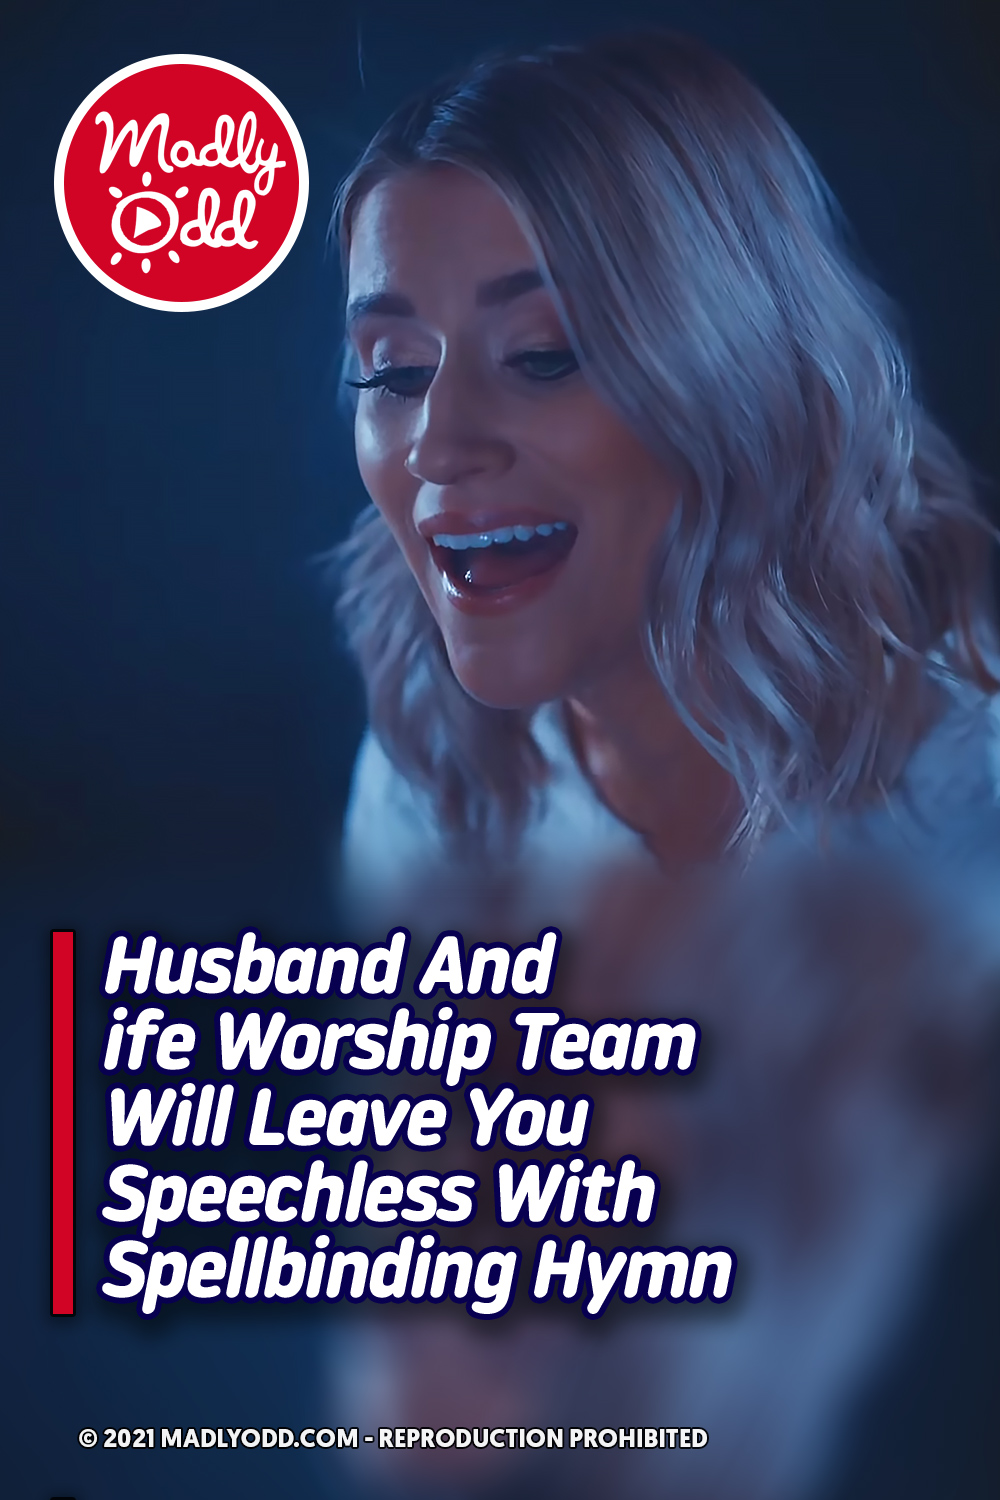 Husband And Wife Worship Team Will Leave You Speechless With Spellbinding Hymn